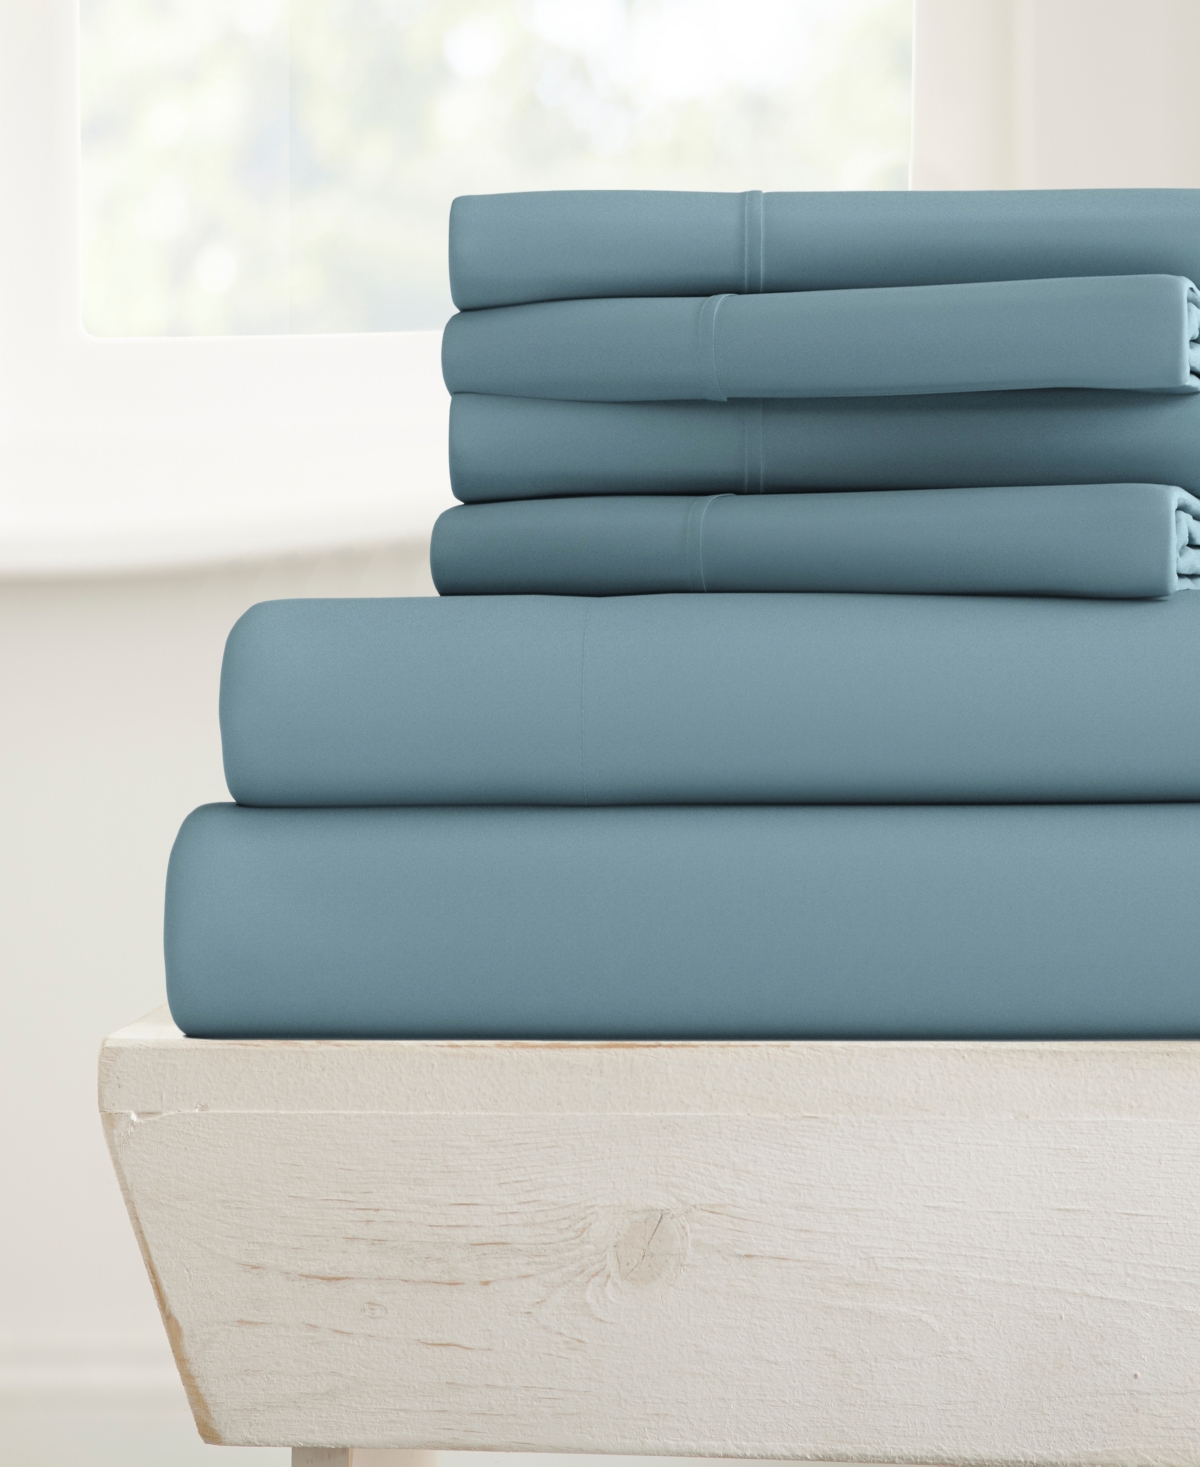 Ienjoy Home Solids In Style By The Home Collection 6 Piece Bed Sheet Set, Queen Bedding In Ocean